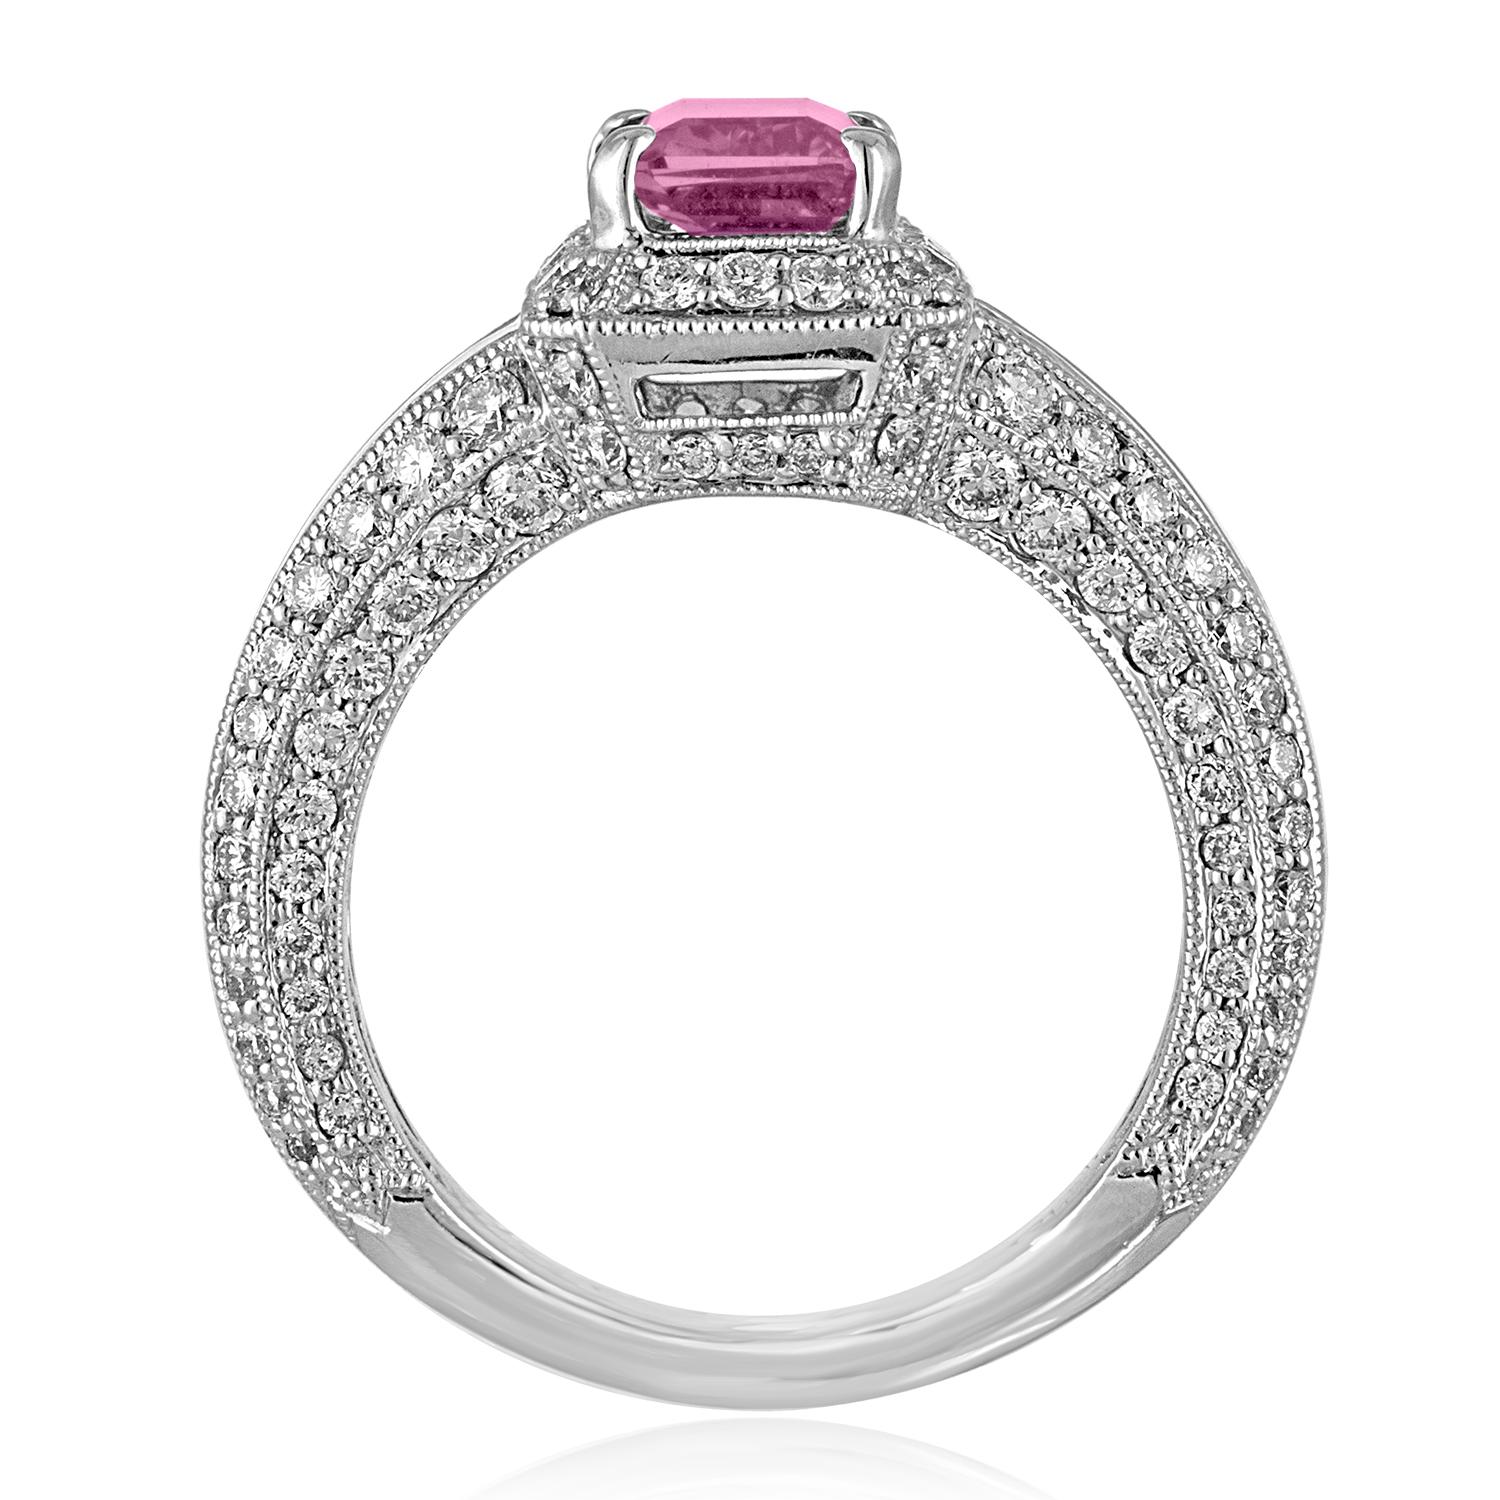 Beautiful Pink Sapphire Milgrain Art Deco Revival Ring
The ring is 18K white Gold
There are 2.05 Carats In White Diamonds F/G VS/SI
The Pink Sapphire is 1.55 Carat Octagon Step Cut
The Sapphire is certified by LAPIS  NO HEAT
Natural Inclusions in